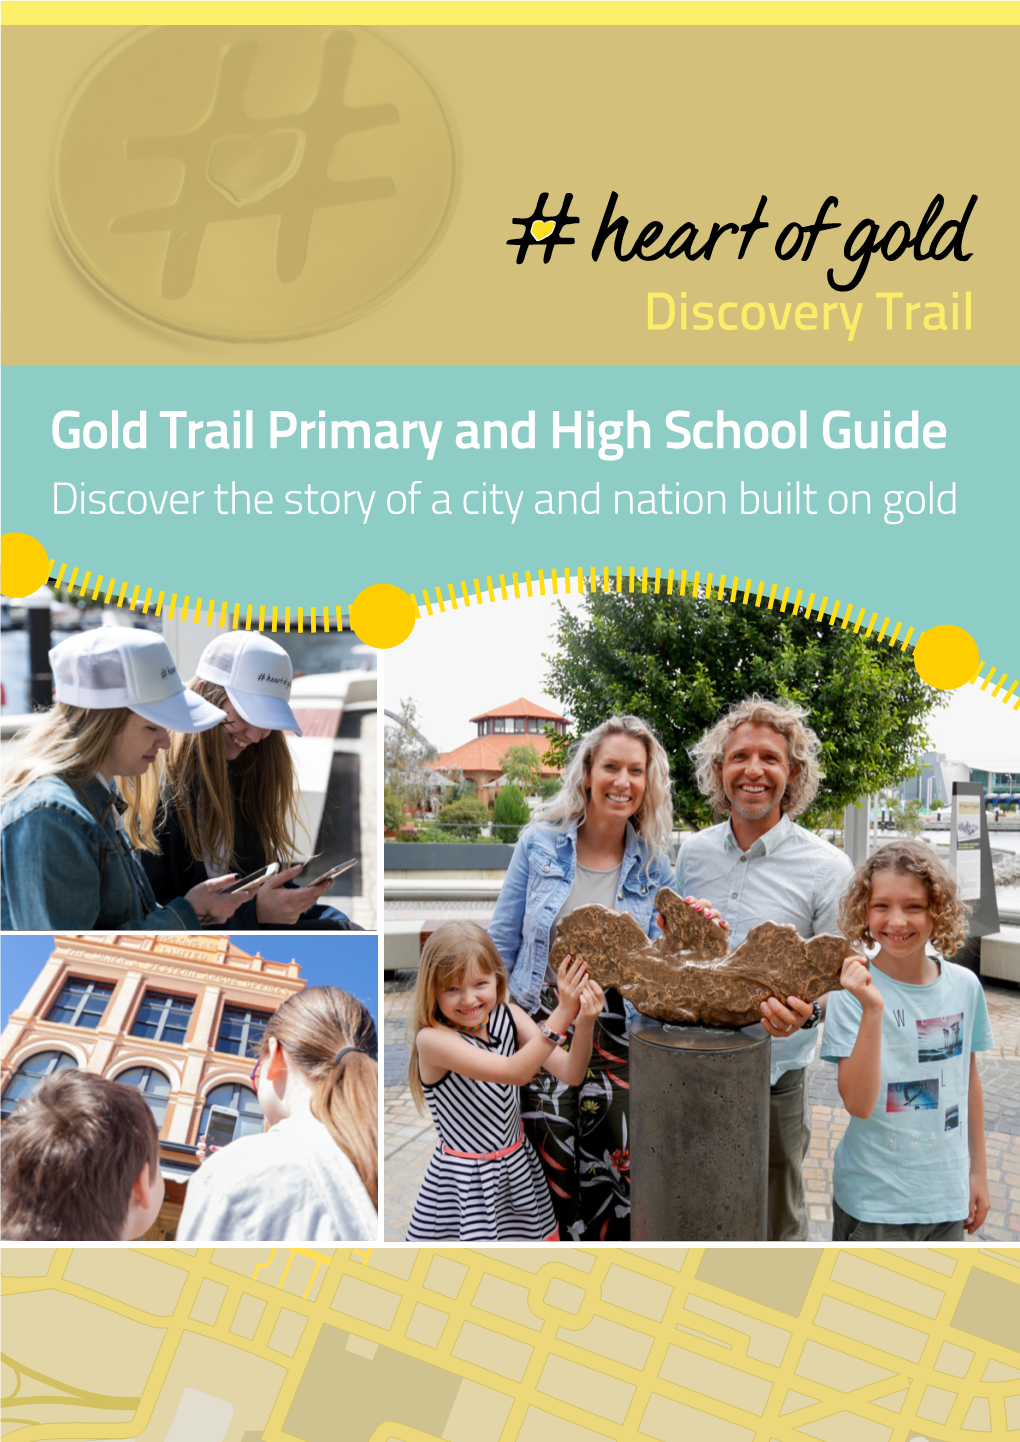 Gold Trail Primary and High School Guide Discover the Story of a City and Nation Built on Gold Discovery Trail